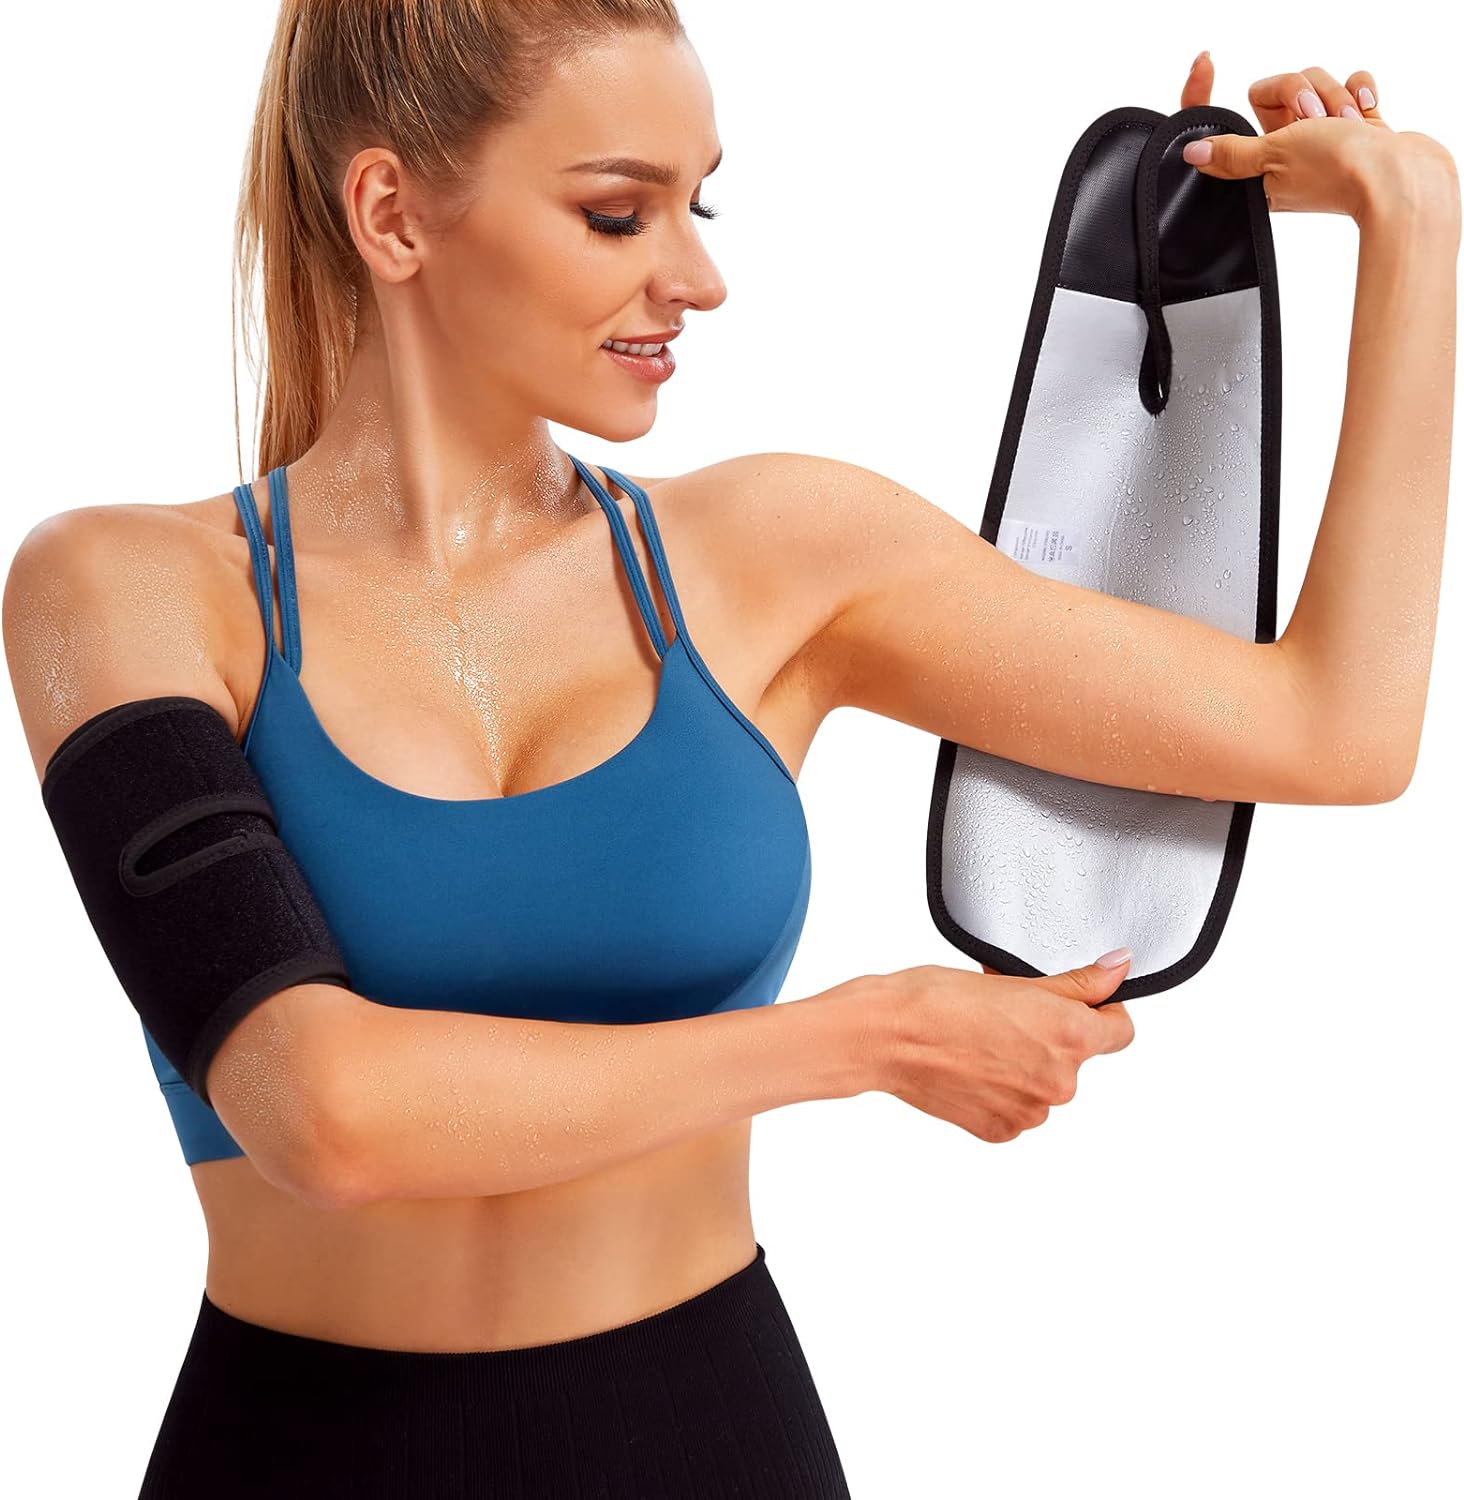 Likeonce Arm Trimmers for Women Sauna Sweat Arm Bands 1 Pair Adjustable Lose Arm Fat Sauna Slimmer for Sports Workout